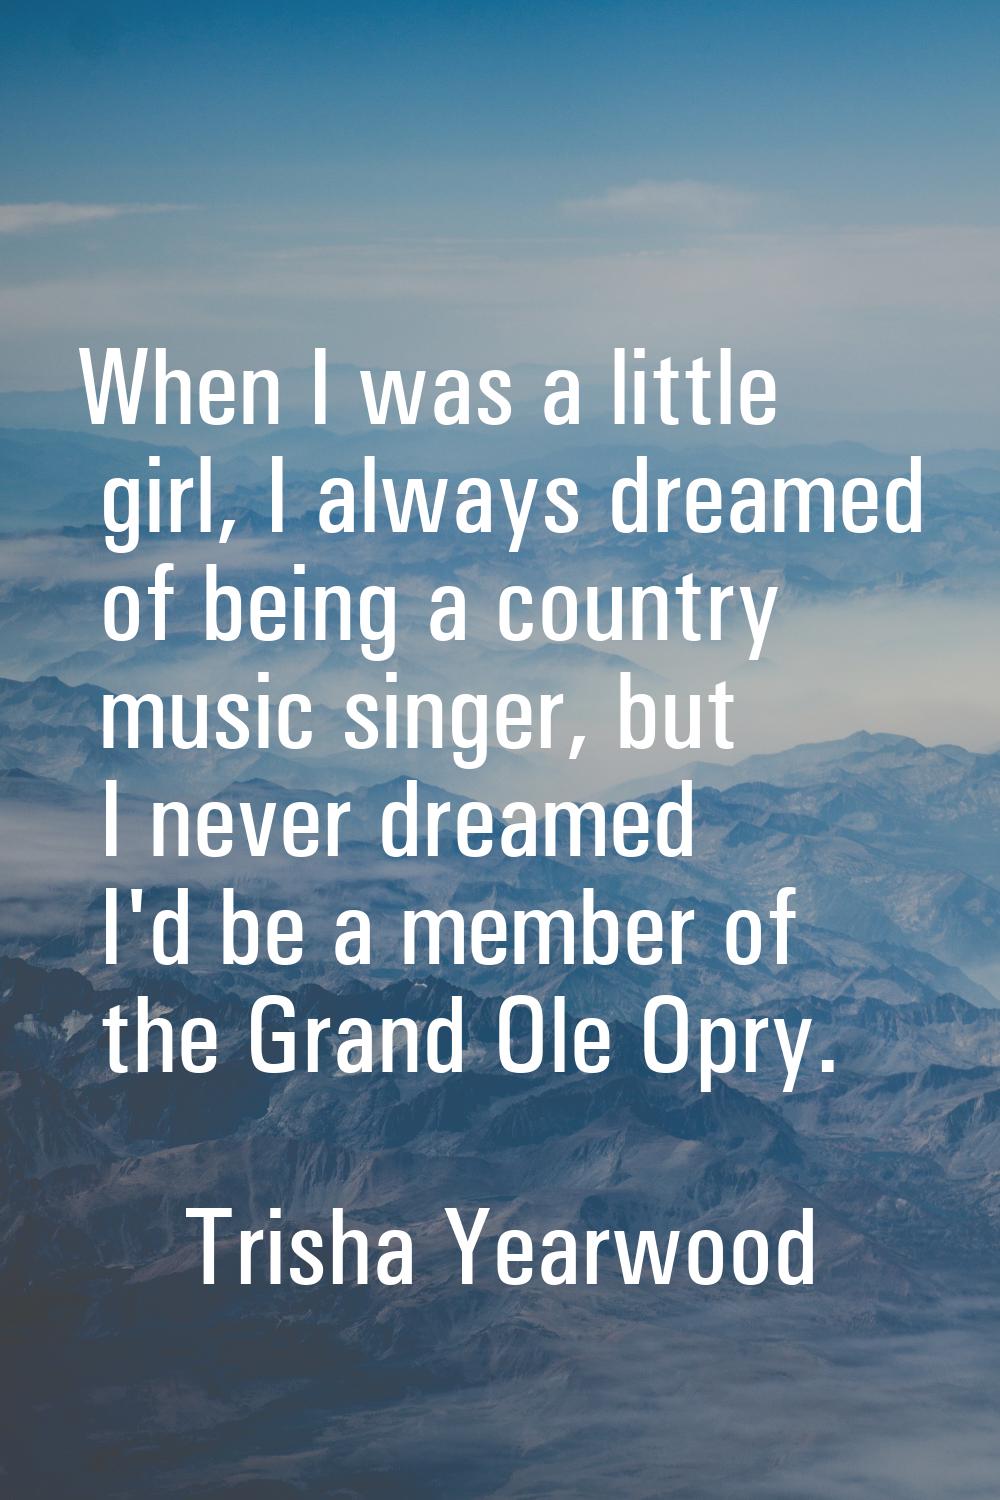 When I was a little girl, I always dreamed of being a country music singer, but I never dreamed I'd